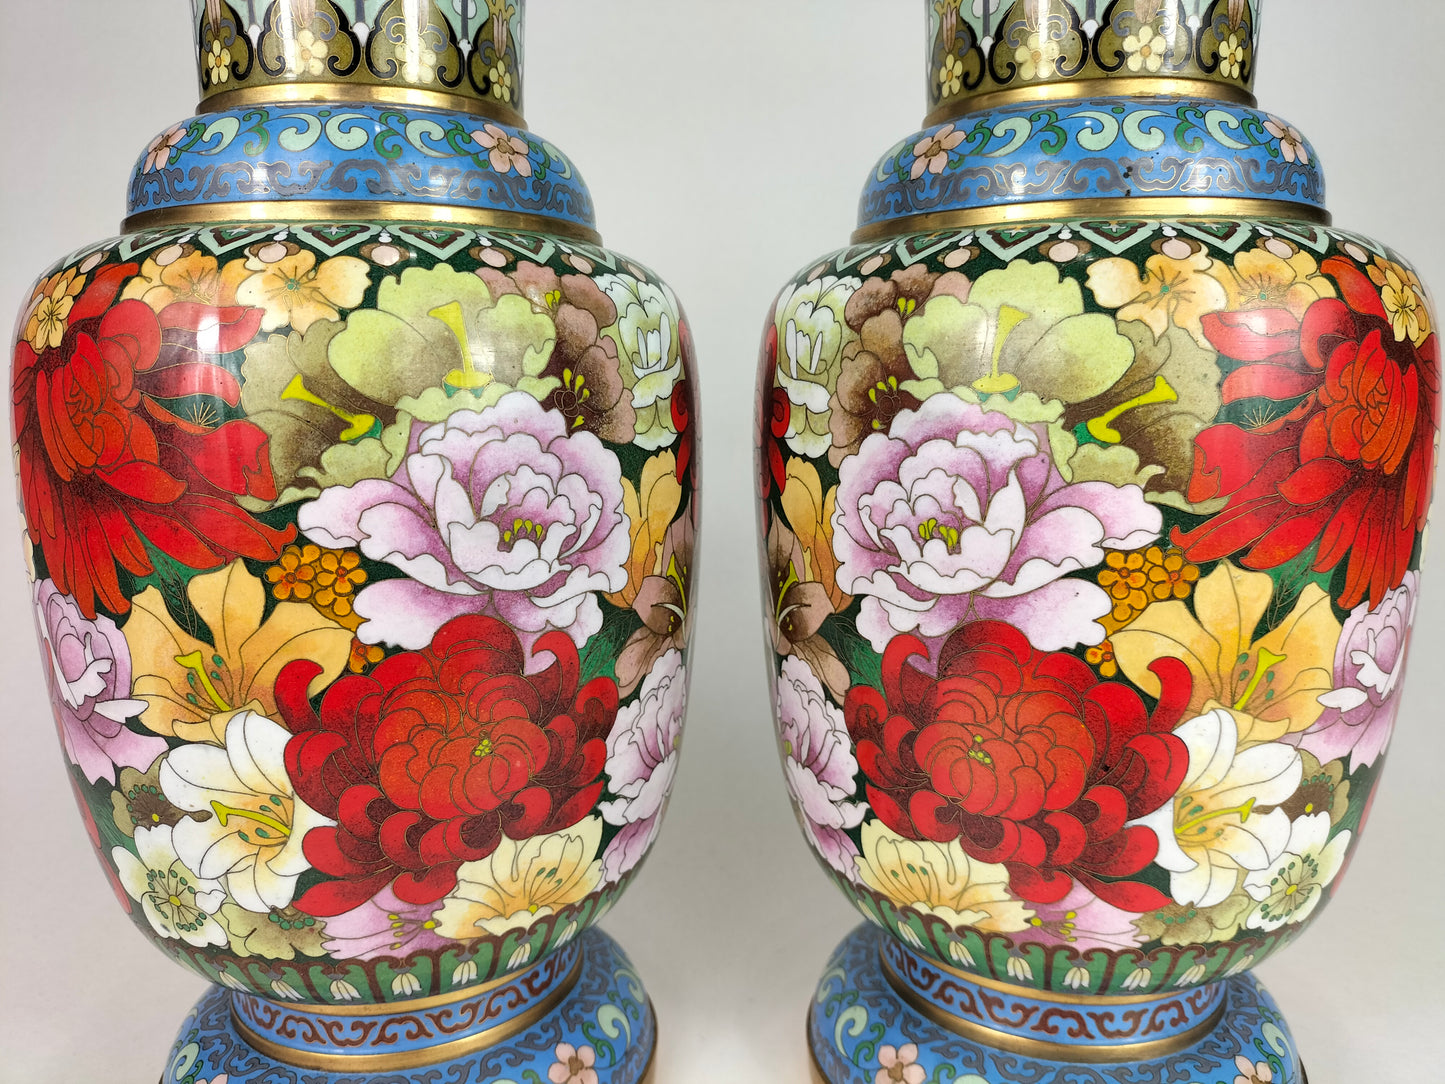 Large pair of Chinese cloisonne millefleur vases // 20th century